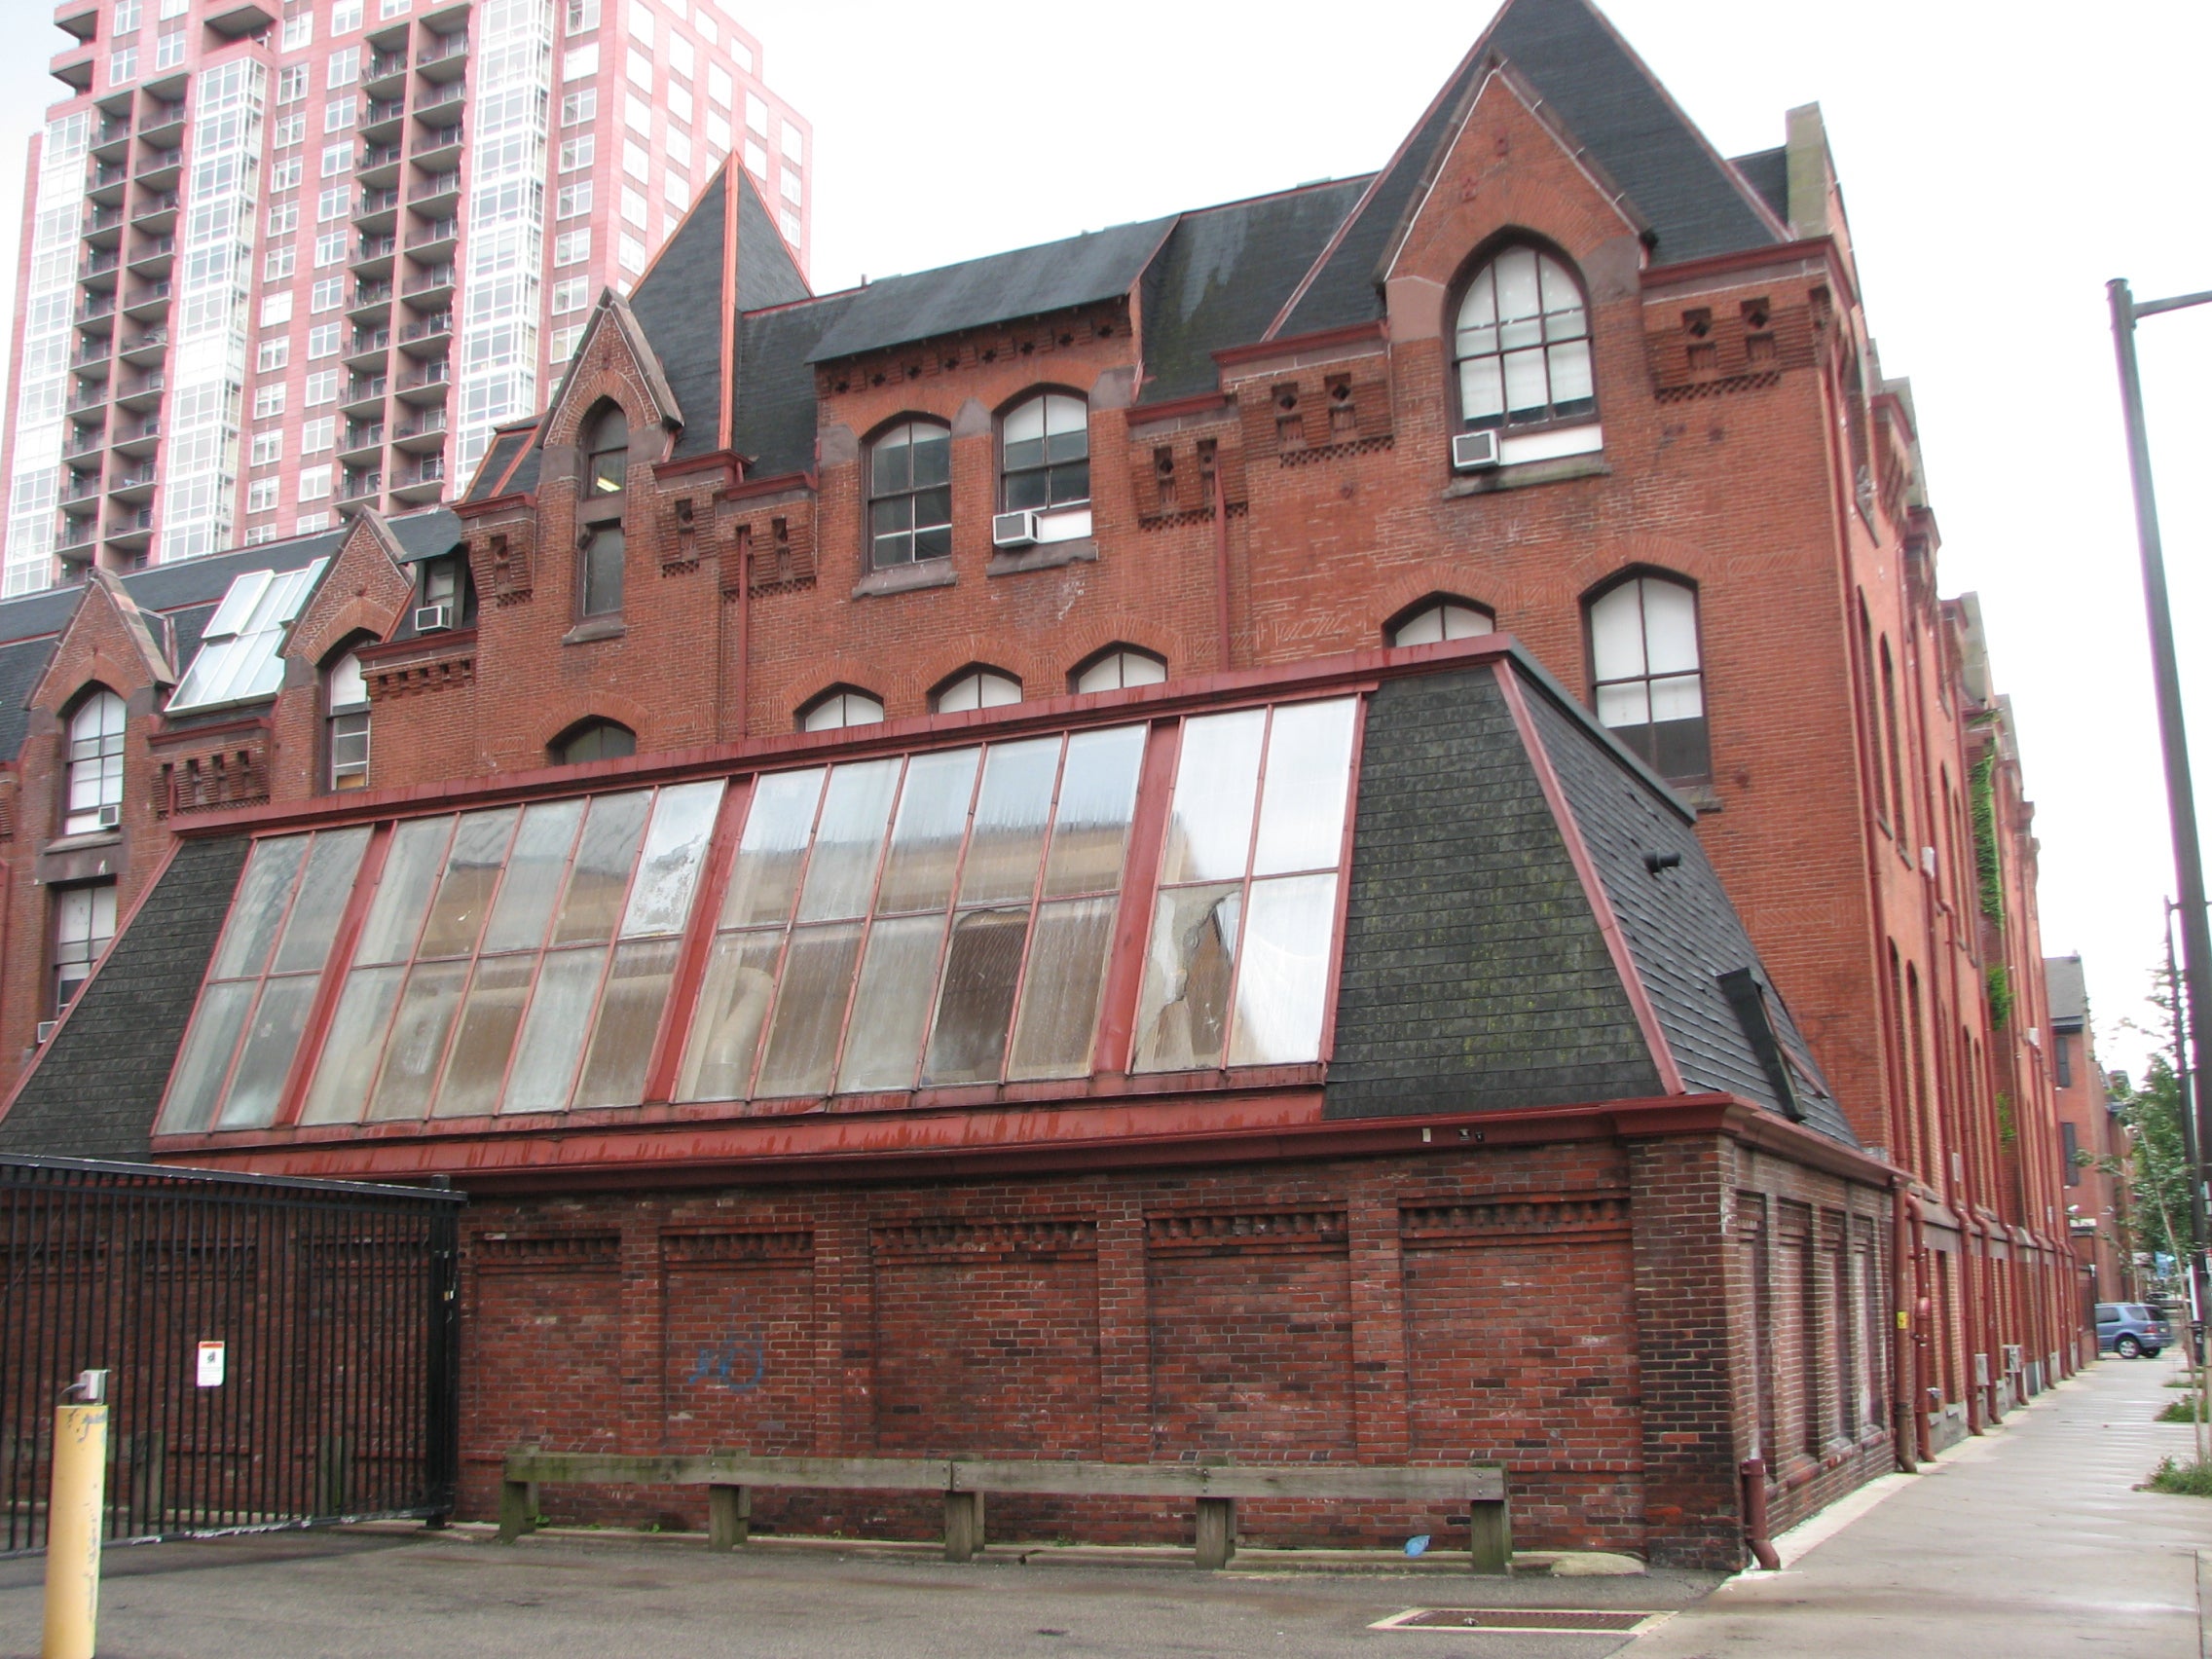 The Furness-designed carriage house now serves as a sculpture studio.  